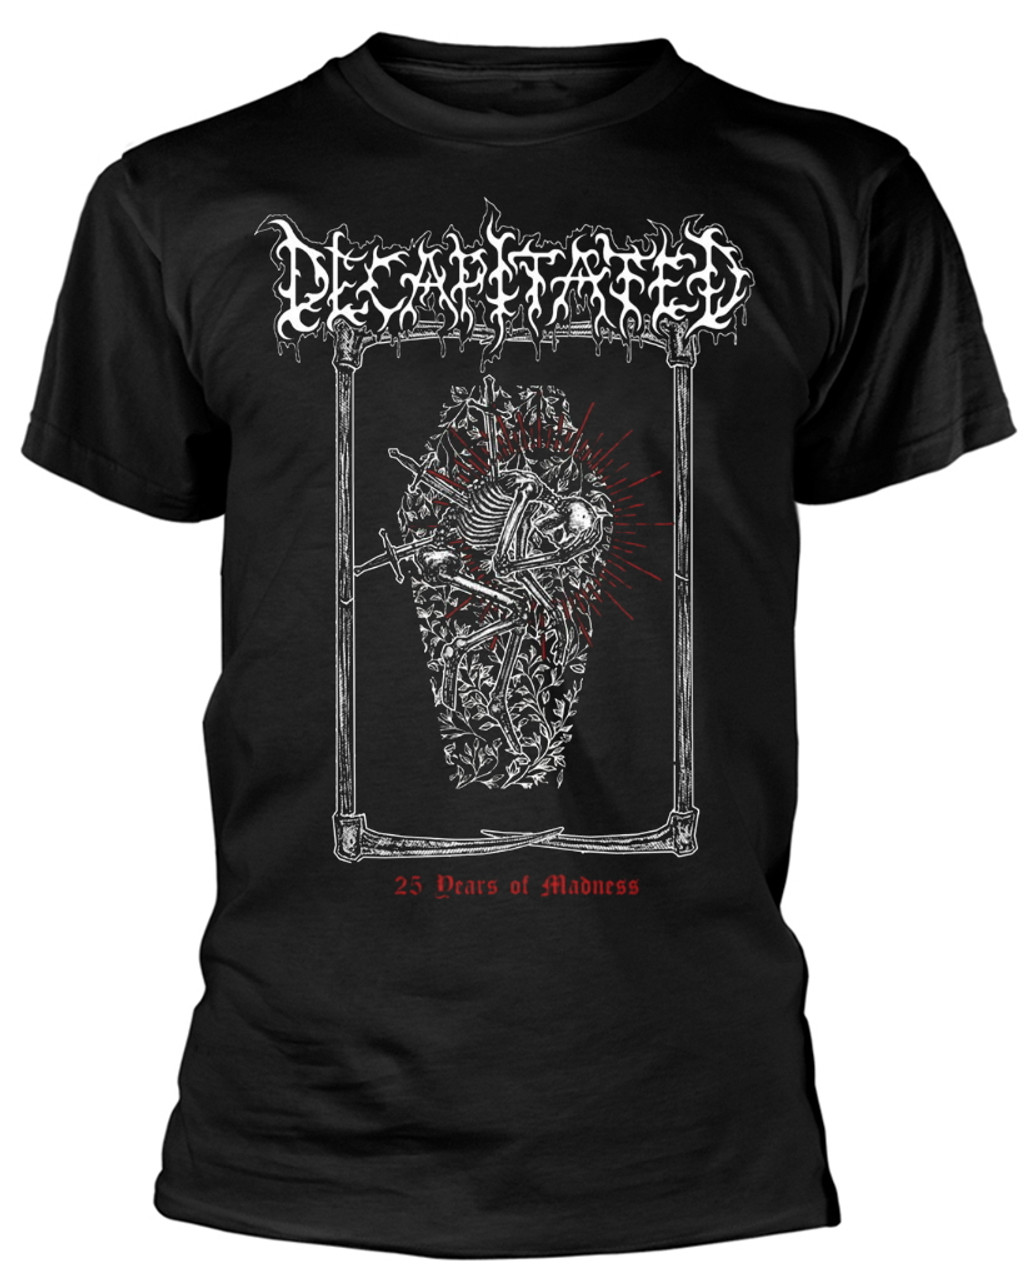 Decapitated 'The First Damned' (Black) T-Shirt